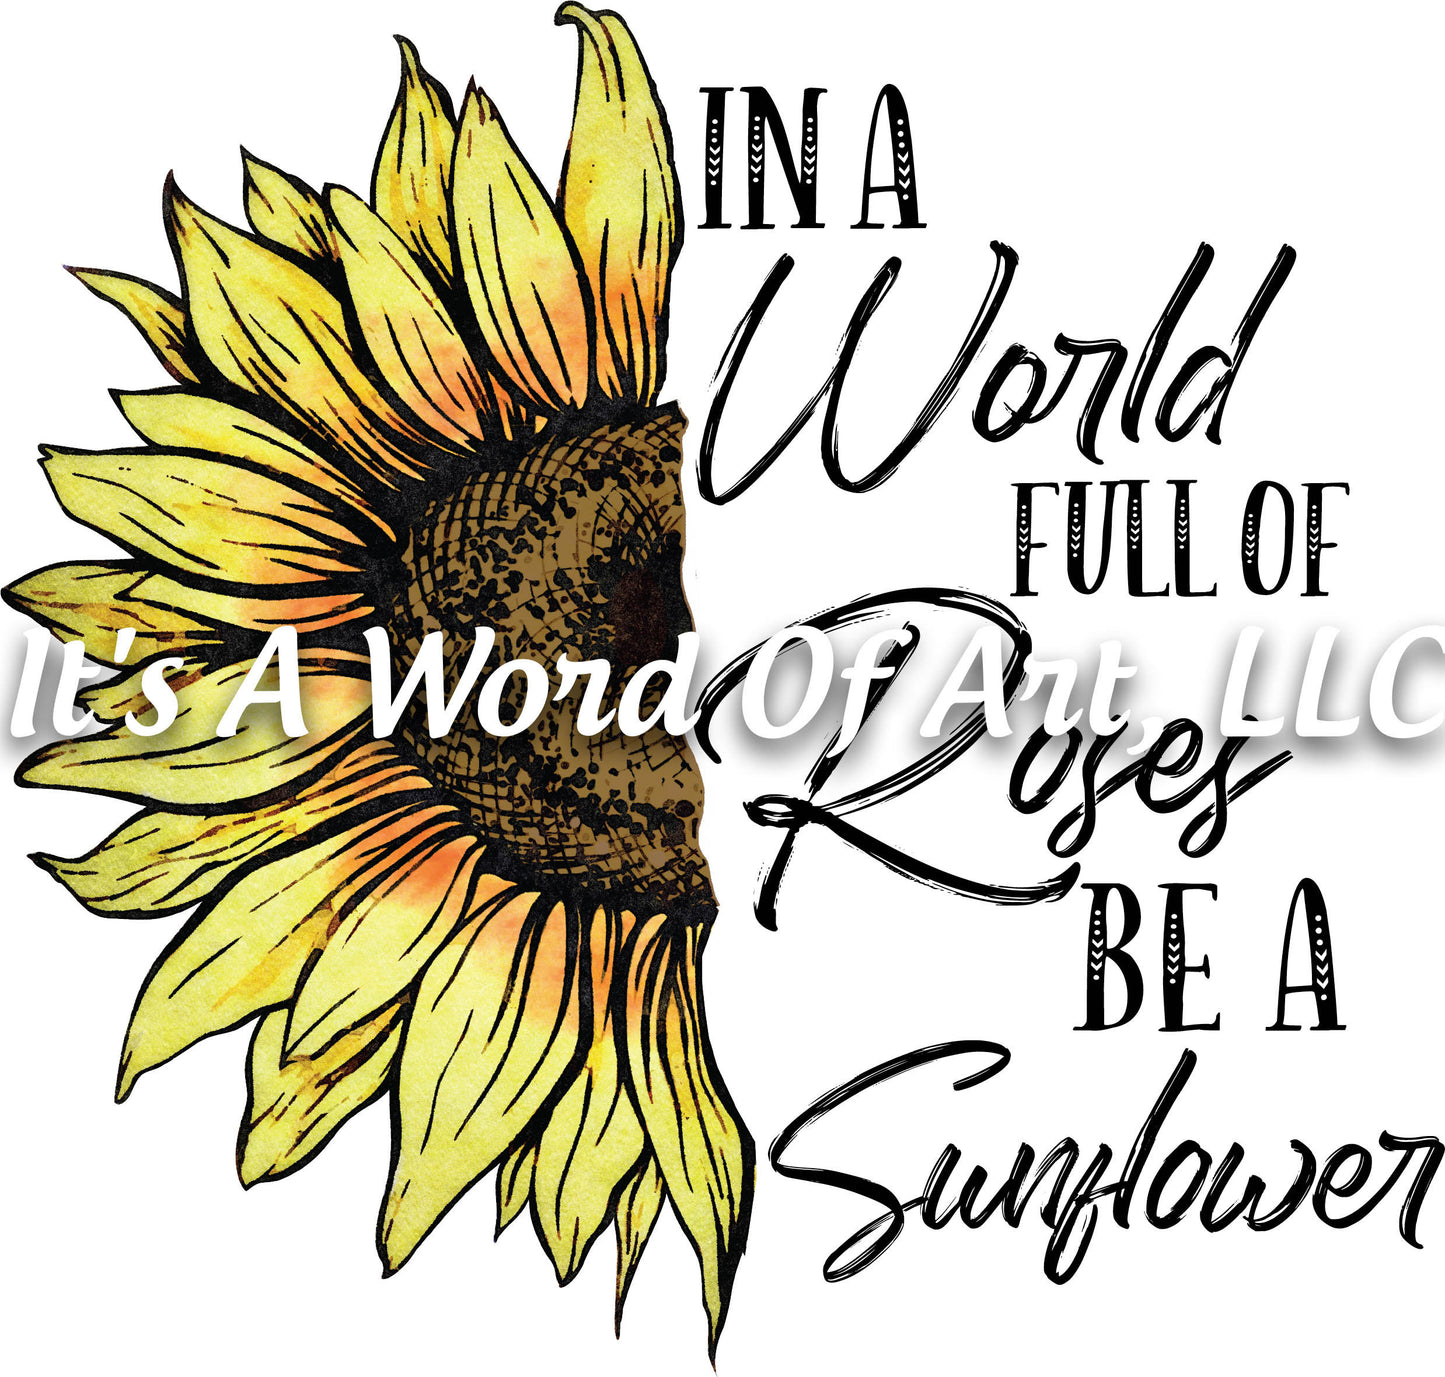 Sunflower 8 - In a World full of Roses be a Sunflower - Sublimation Transfer Set/Ready To Press Sublimation Transfer/Sublimation Transfer